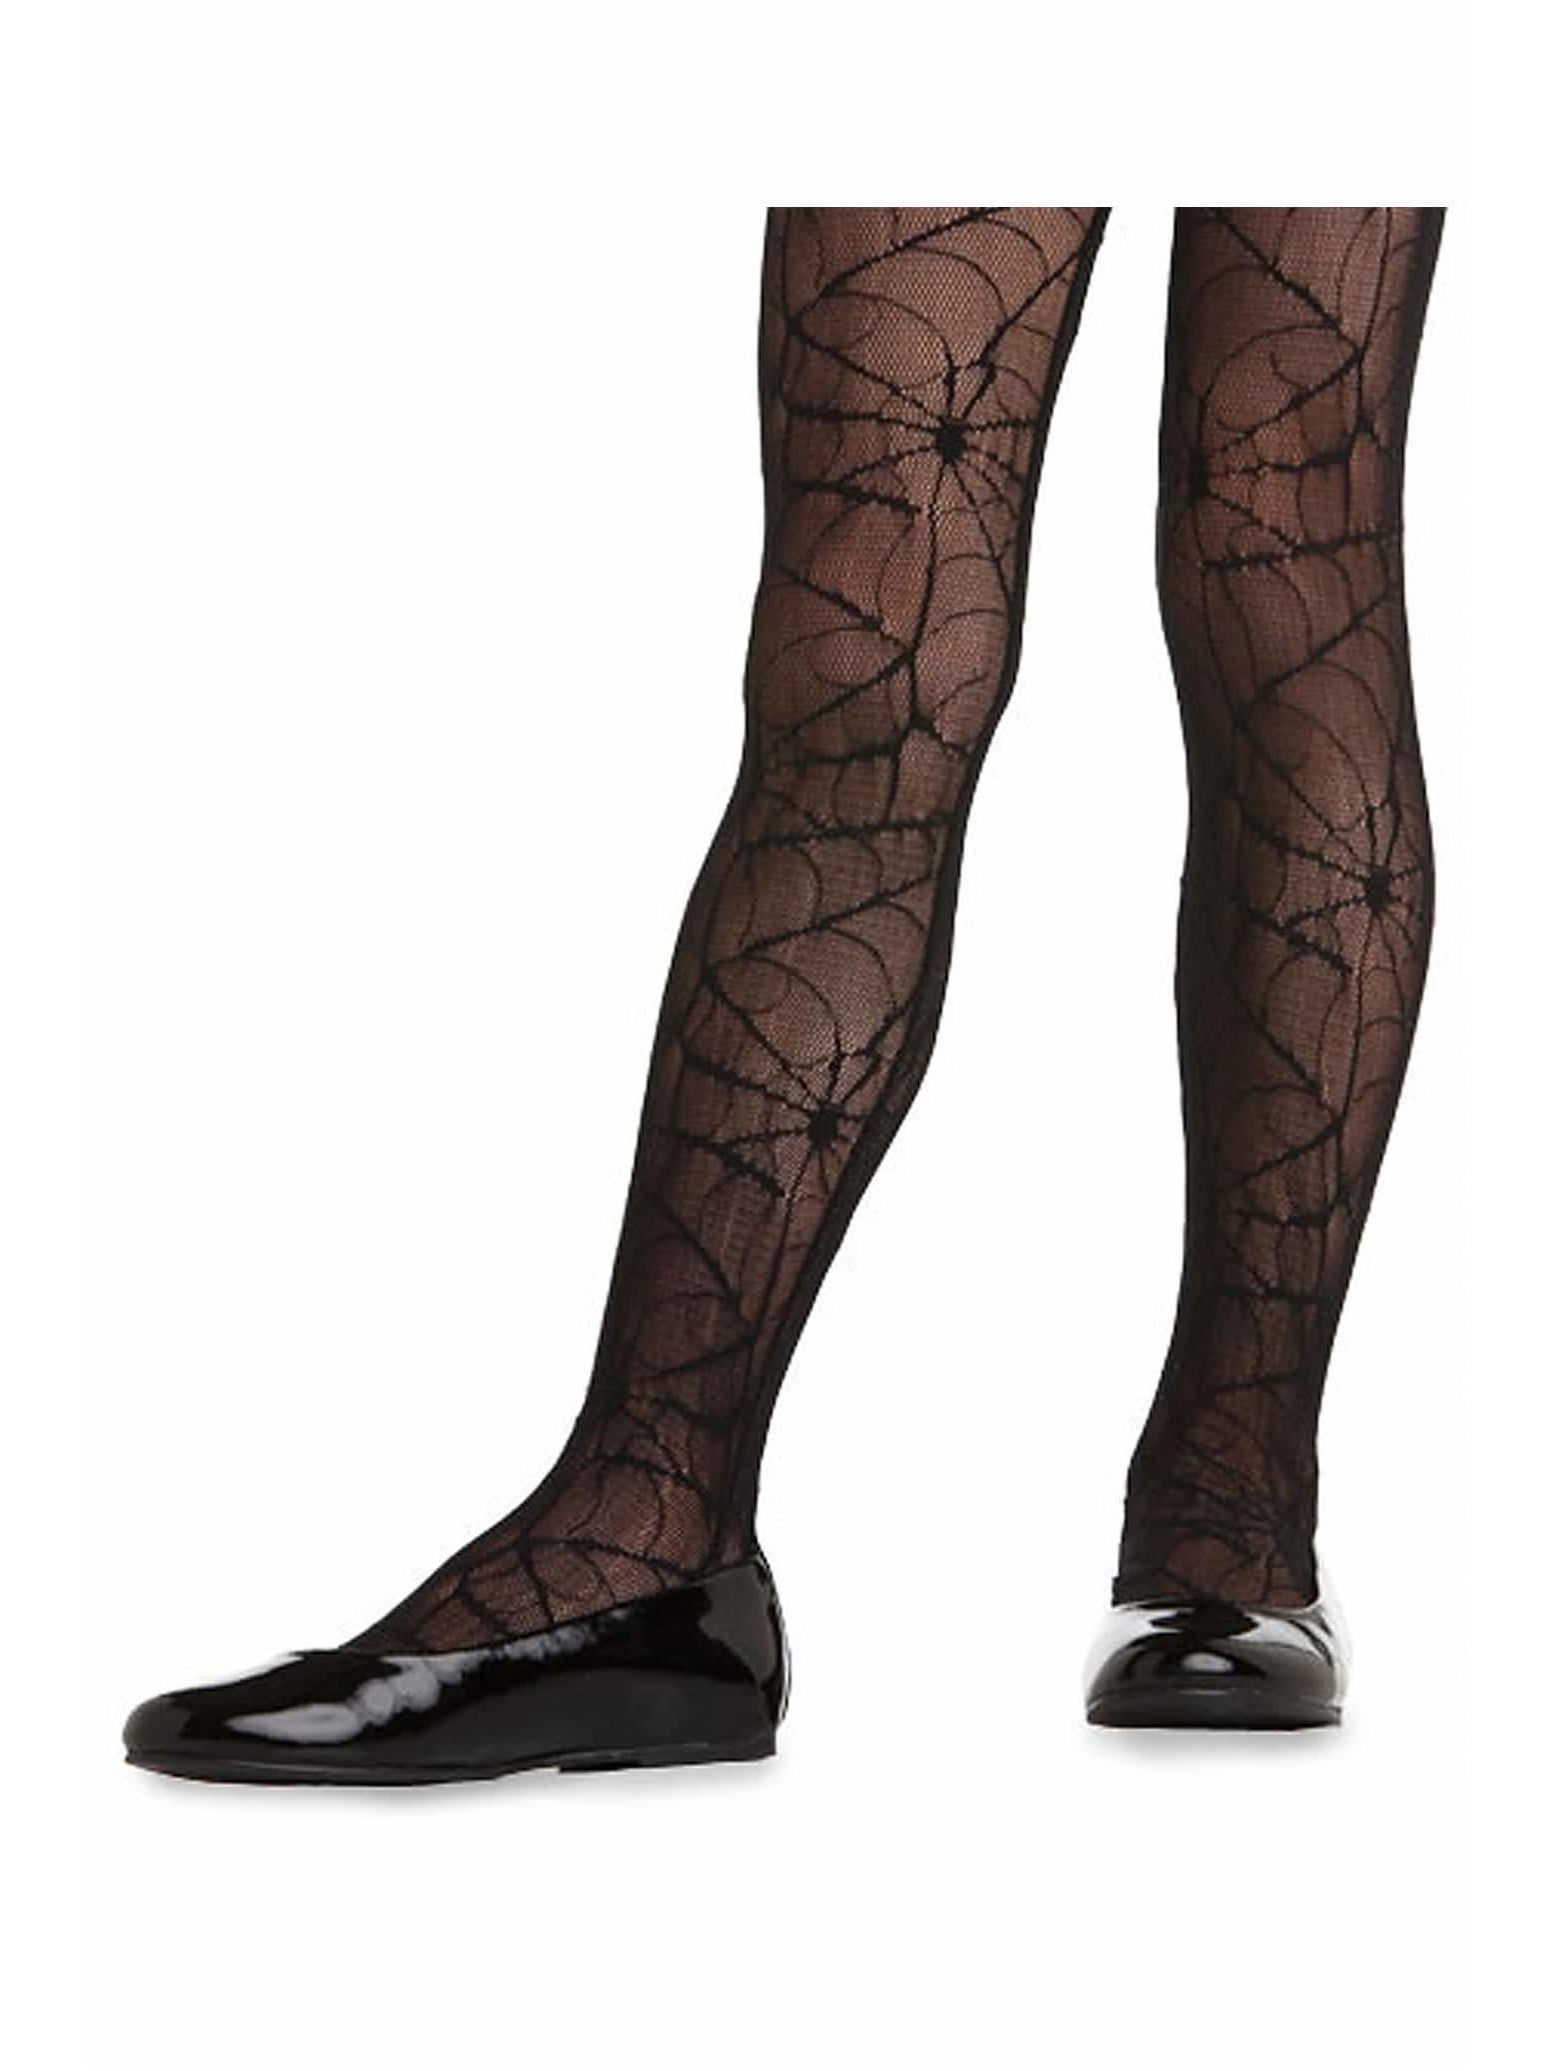 Girls Spiderweb Tights | Accessories | Costumes & Dress-up - Chasing ...